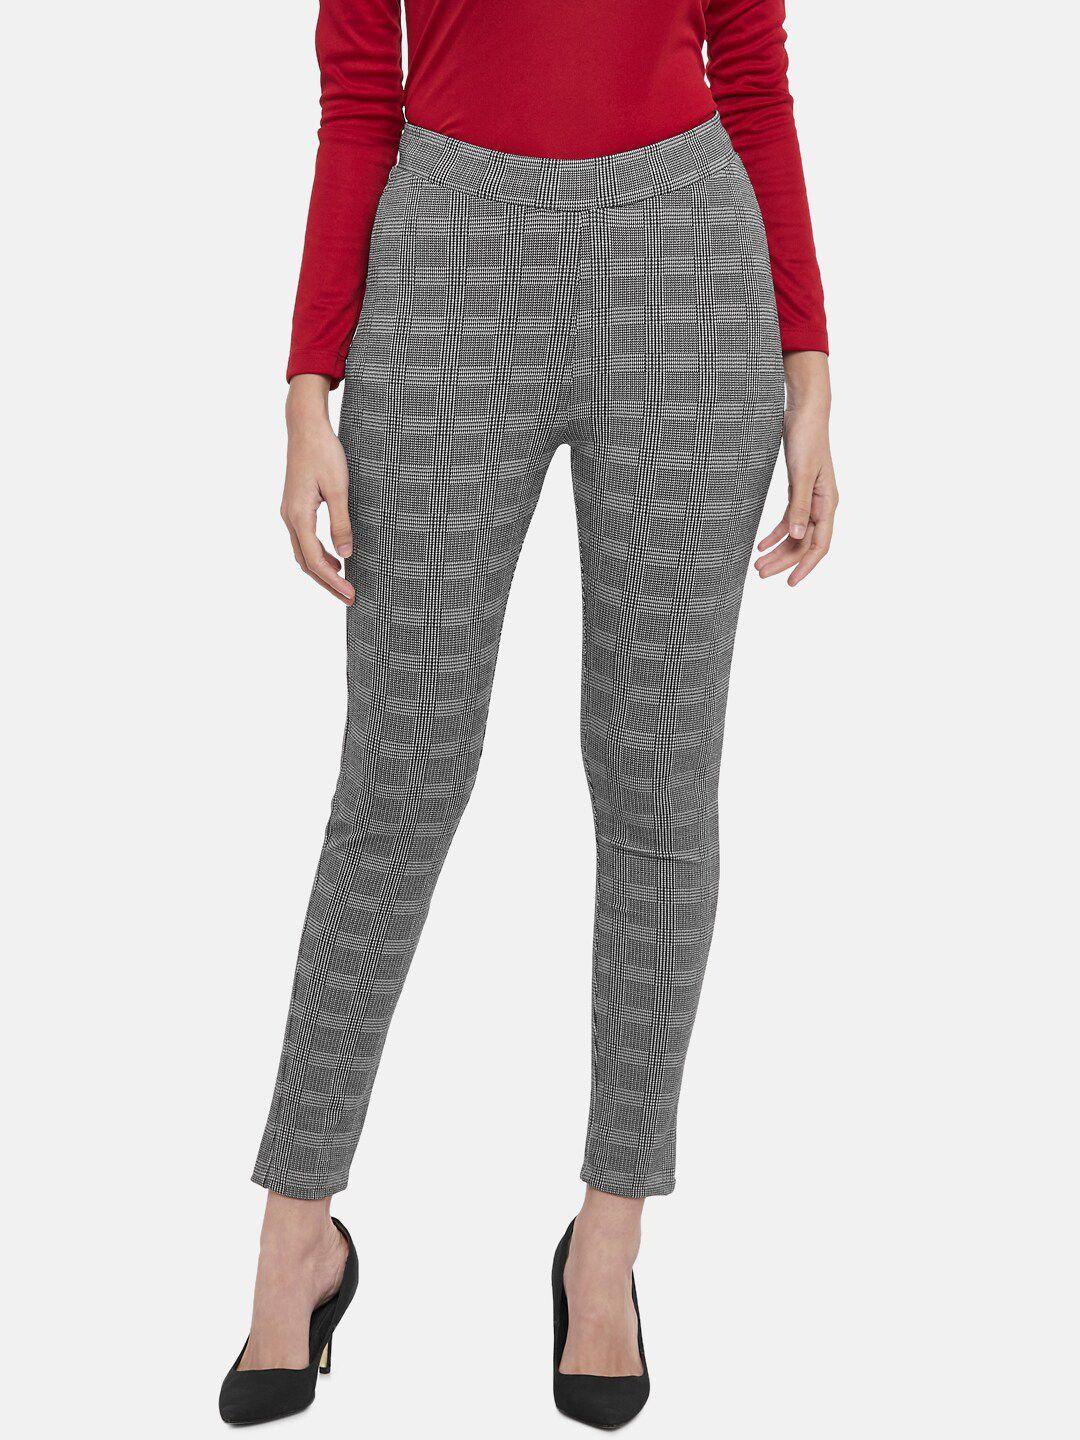 annabelle-by-pantaloons-women-grey-&-white-checked-slim-fit-treggings